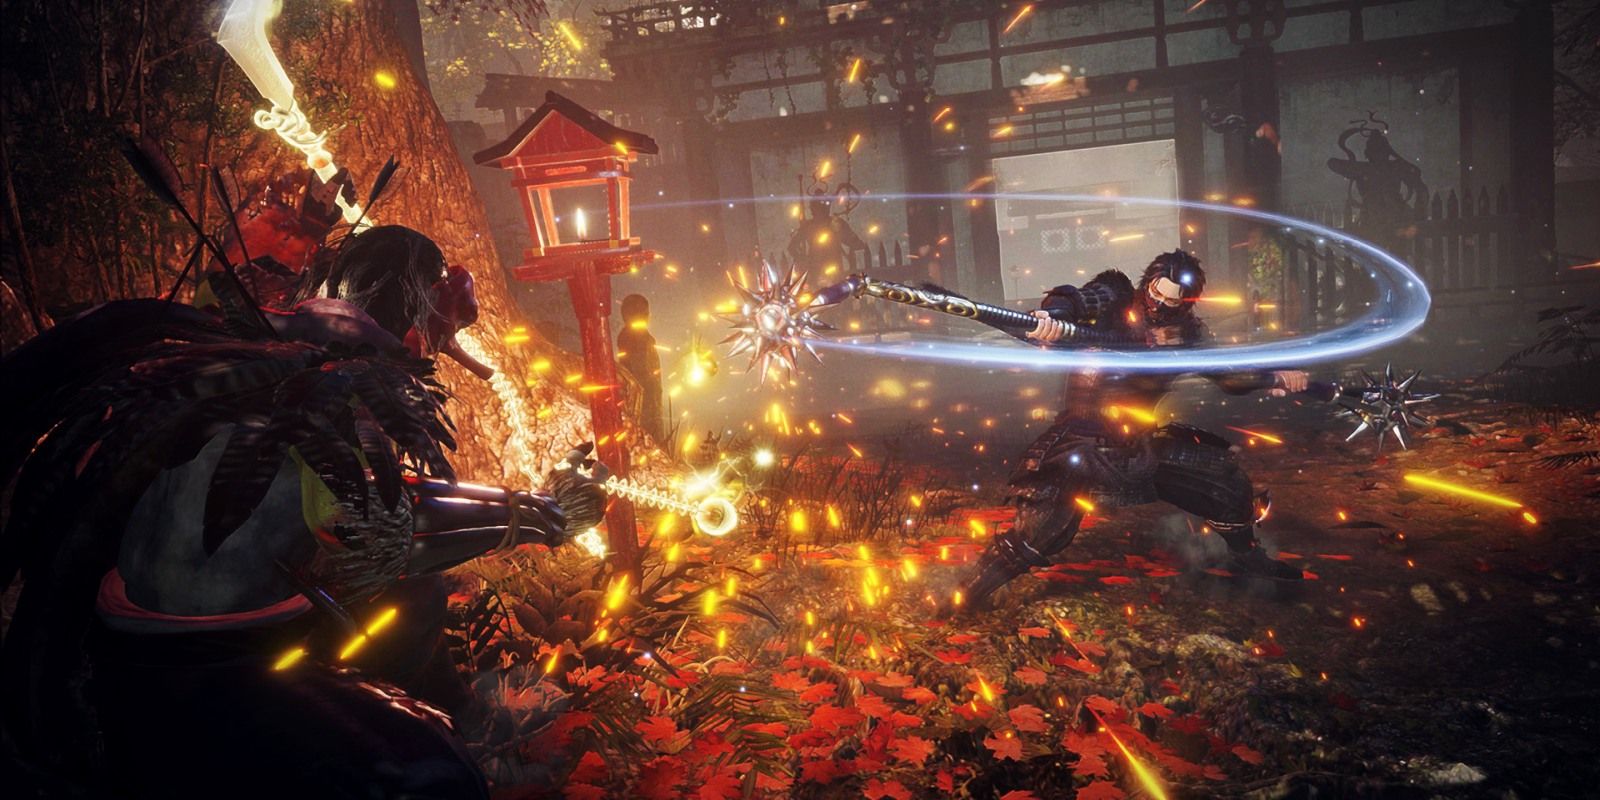 Combat in Nioh 2 full of sparks between two players with mace-like weapons.